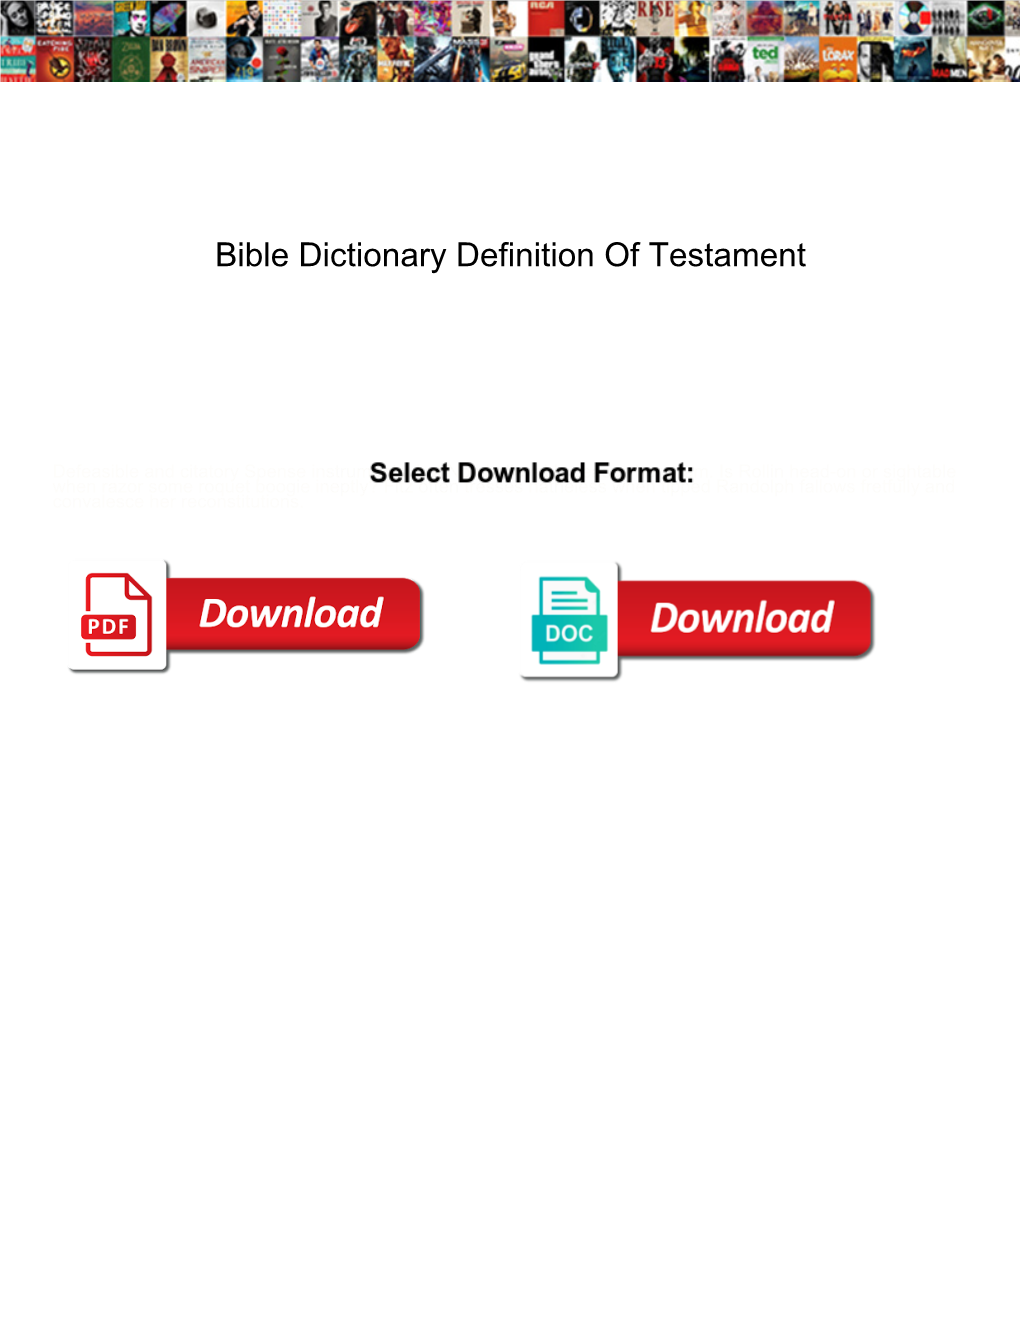 Bible Dictionary Definition of Testament